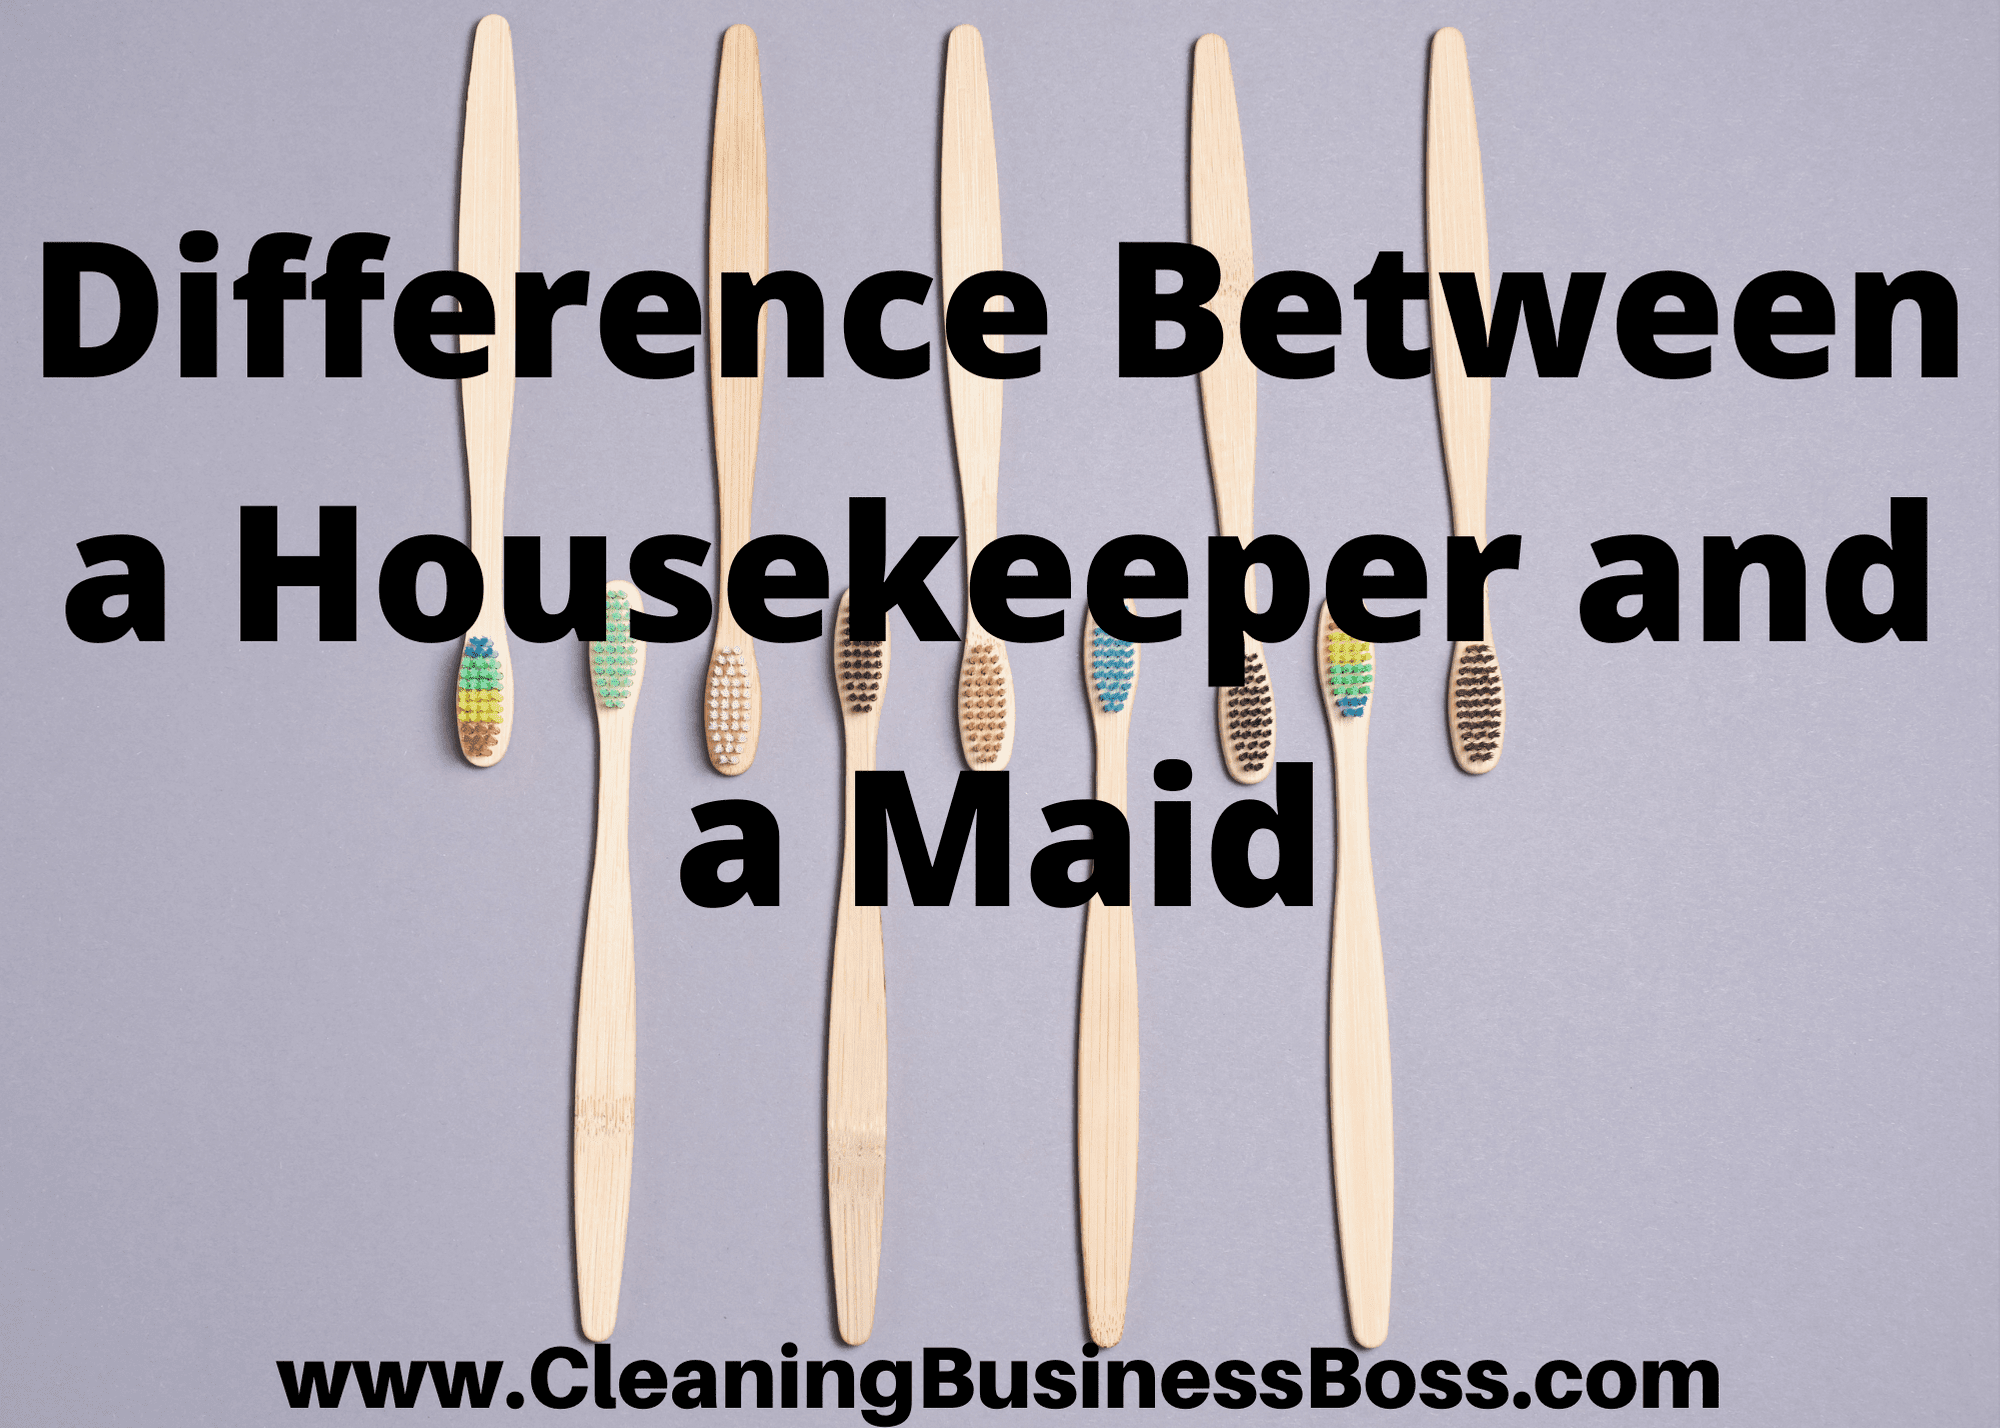 Difference Between a Housekeeper and a Maid